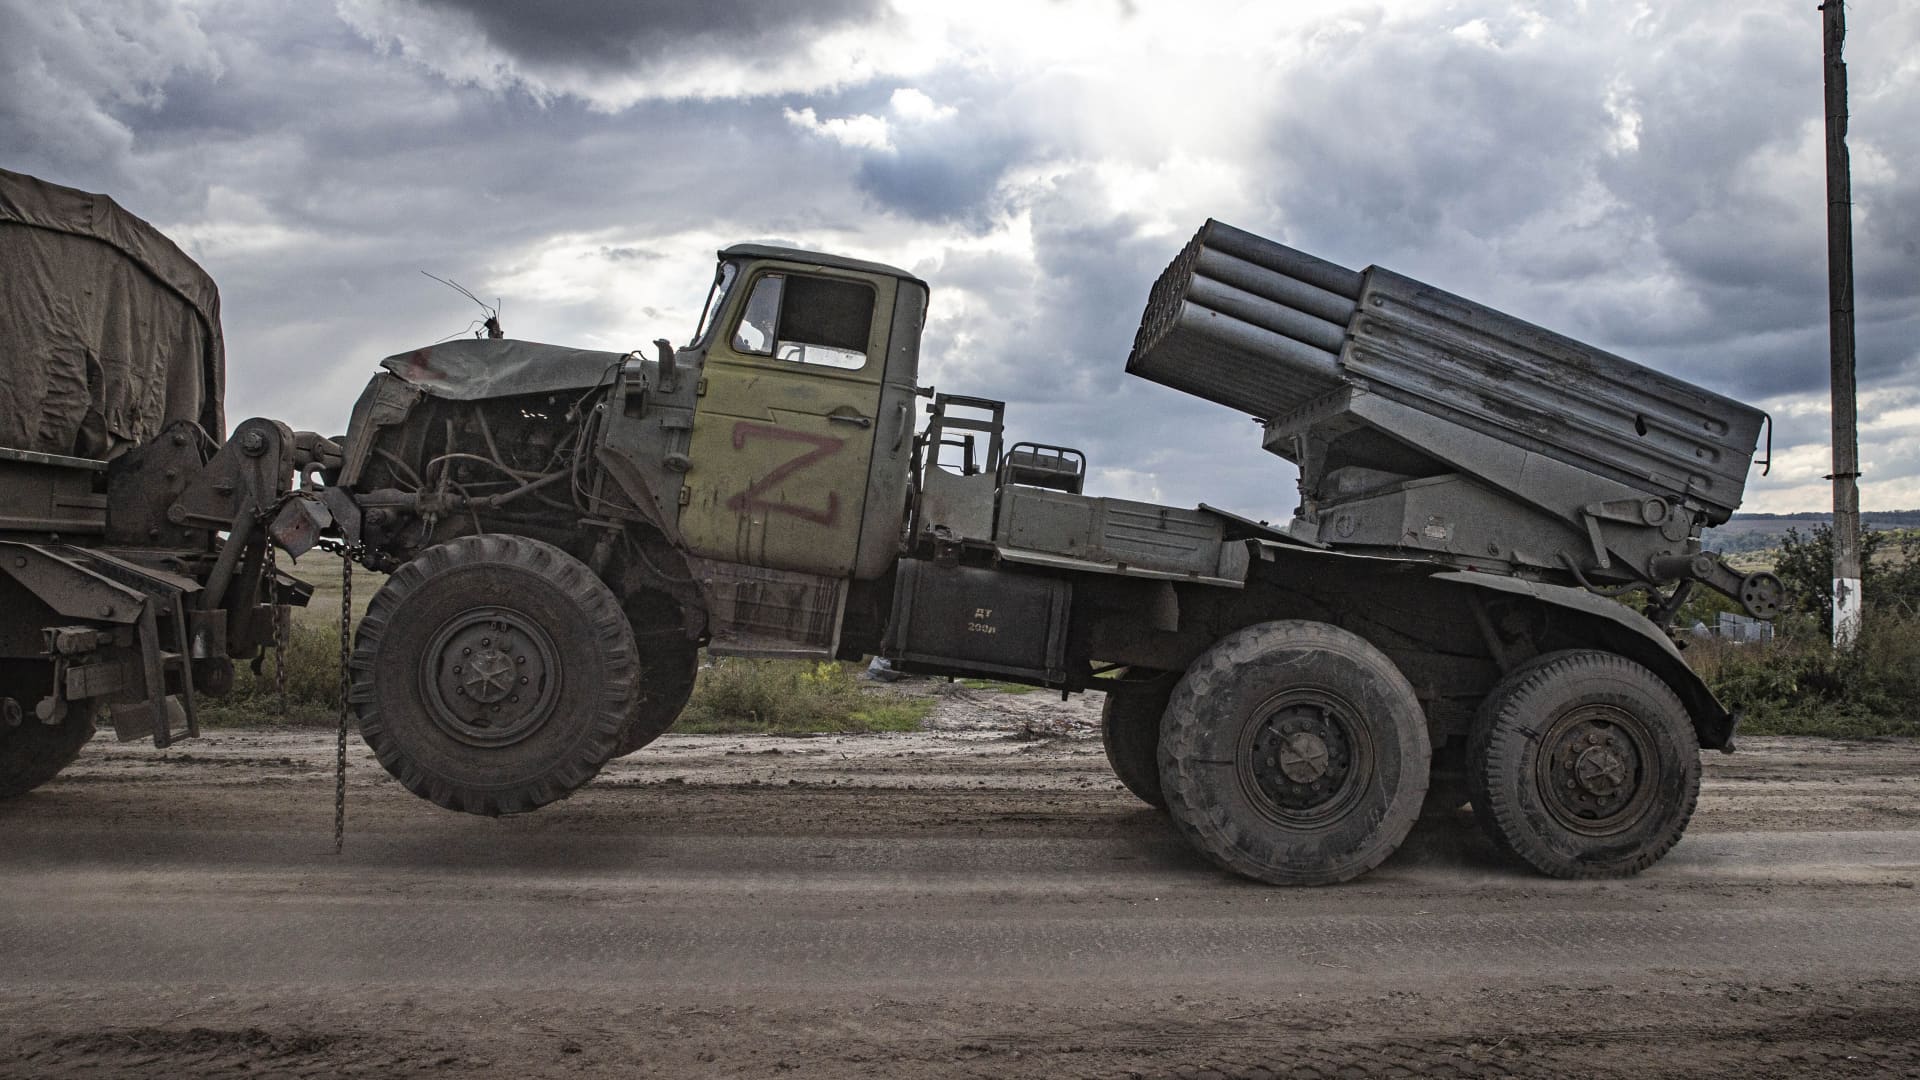 Ukrainian forces transport Russian vehicles and missile launch pads left behind by the Russian forces in Izium, Kharkiv, Ukraine on October 02, 2022.